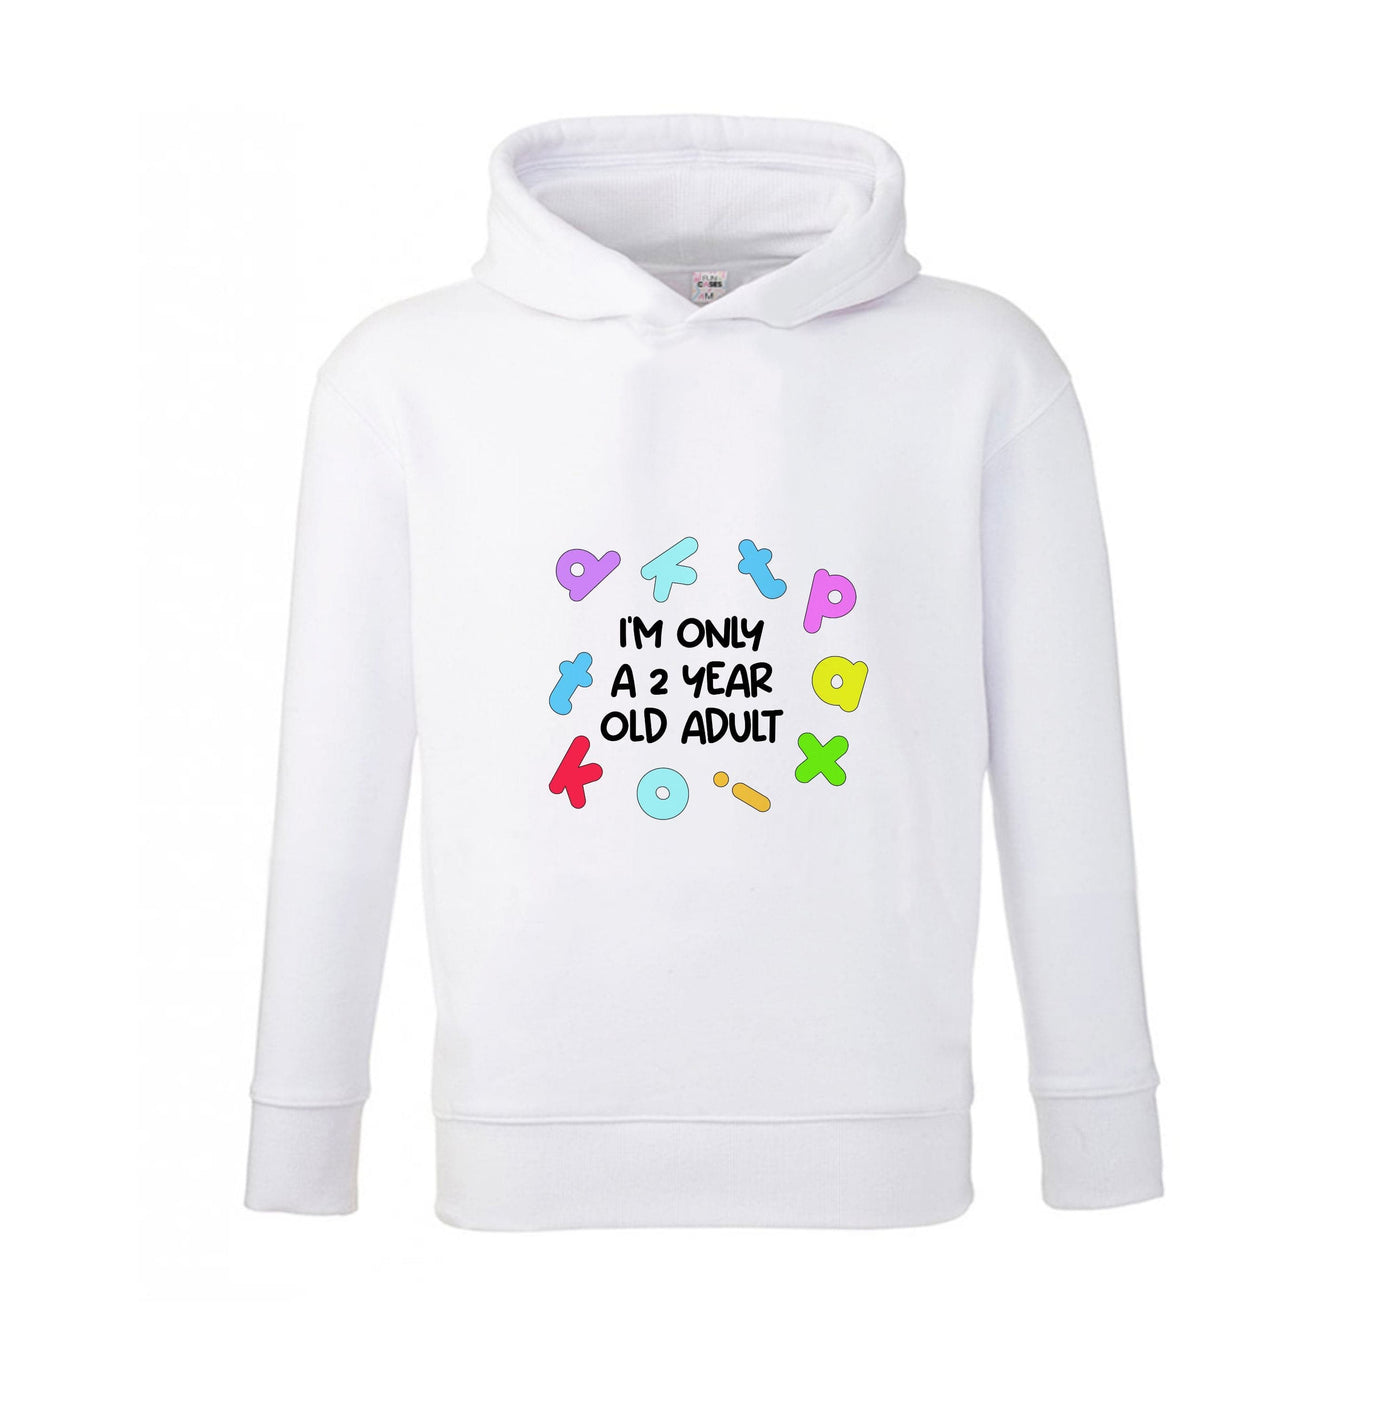 I'm Only A 2 Year Old Adult - Aesthetic Quote Kids Hoodie